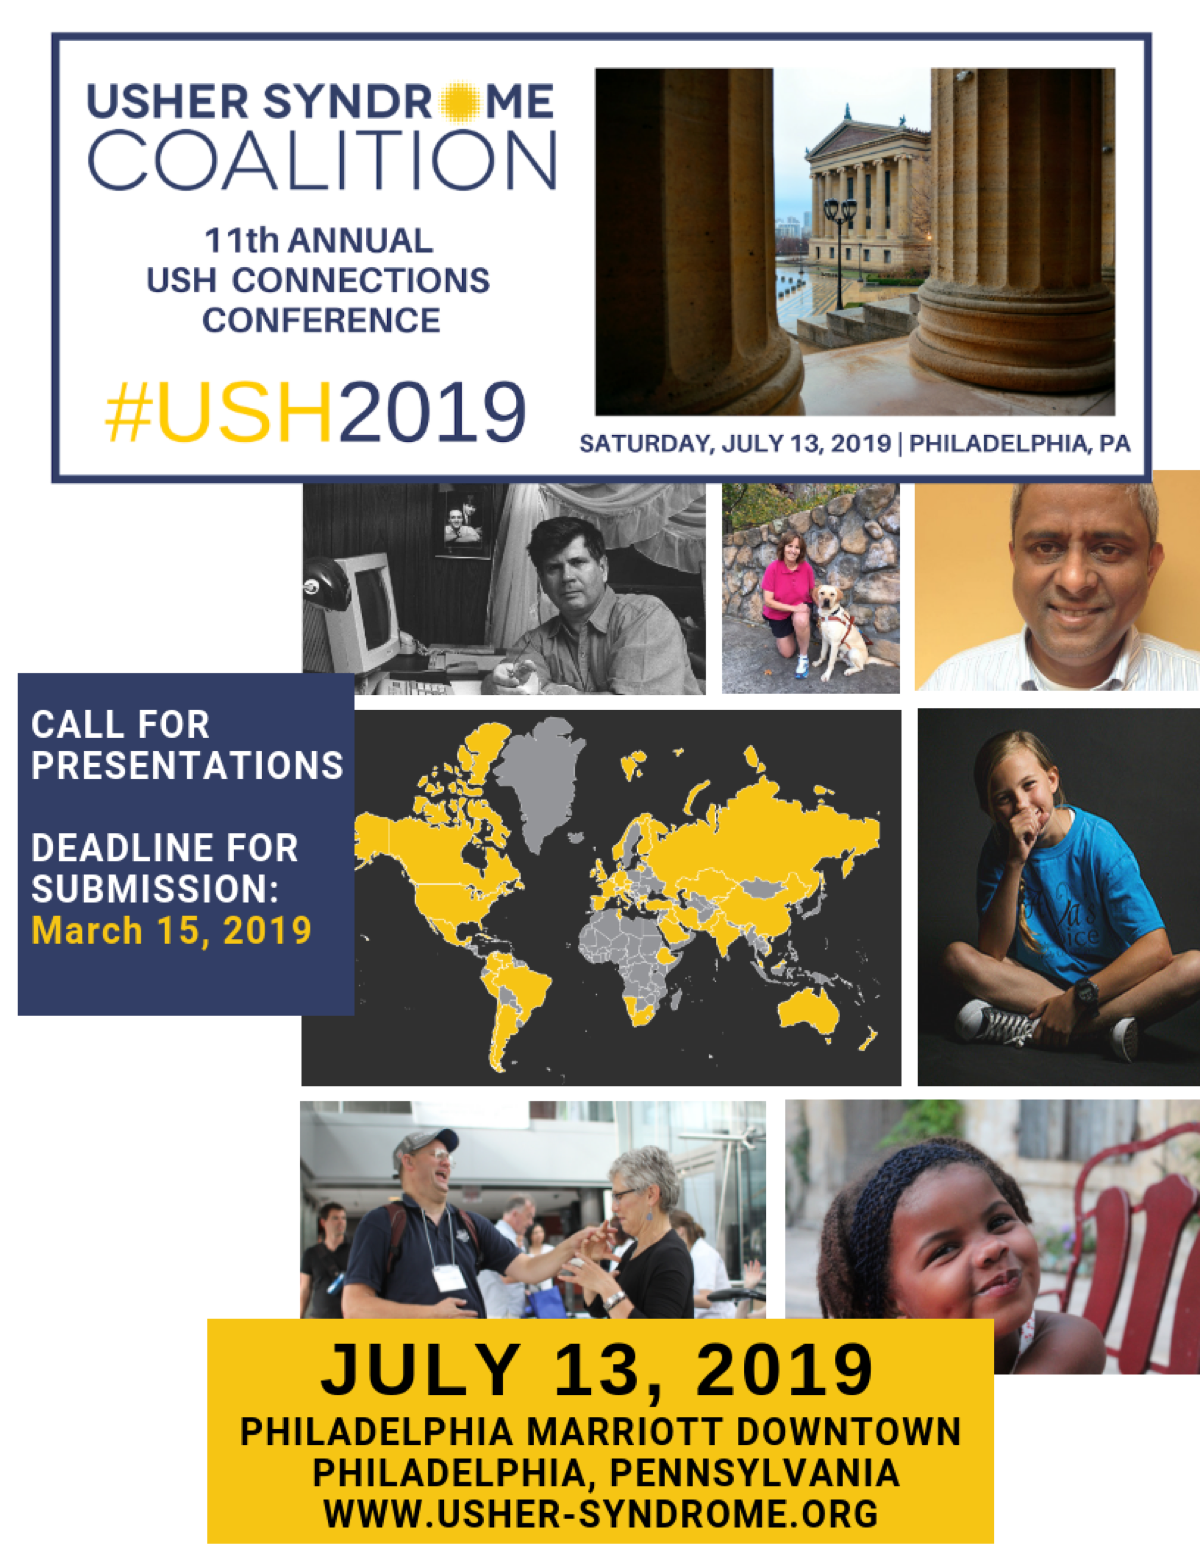 Cover Image for USH2019 Call for Presentations Form: Usher Syndrome Coalition 11th Annual USH Connections Conference, #USH2019, Saturday, July 13, 2019, Philadelphia, PA, Call for Presentations Deadline for Submission: March 15, 2019